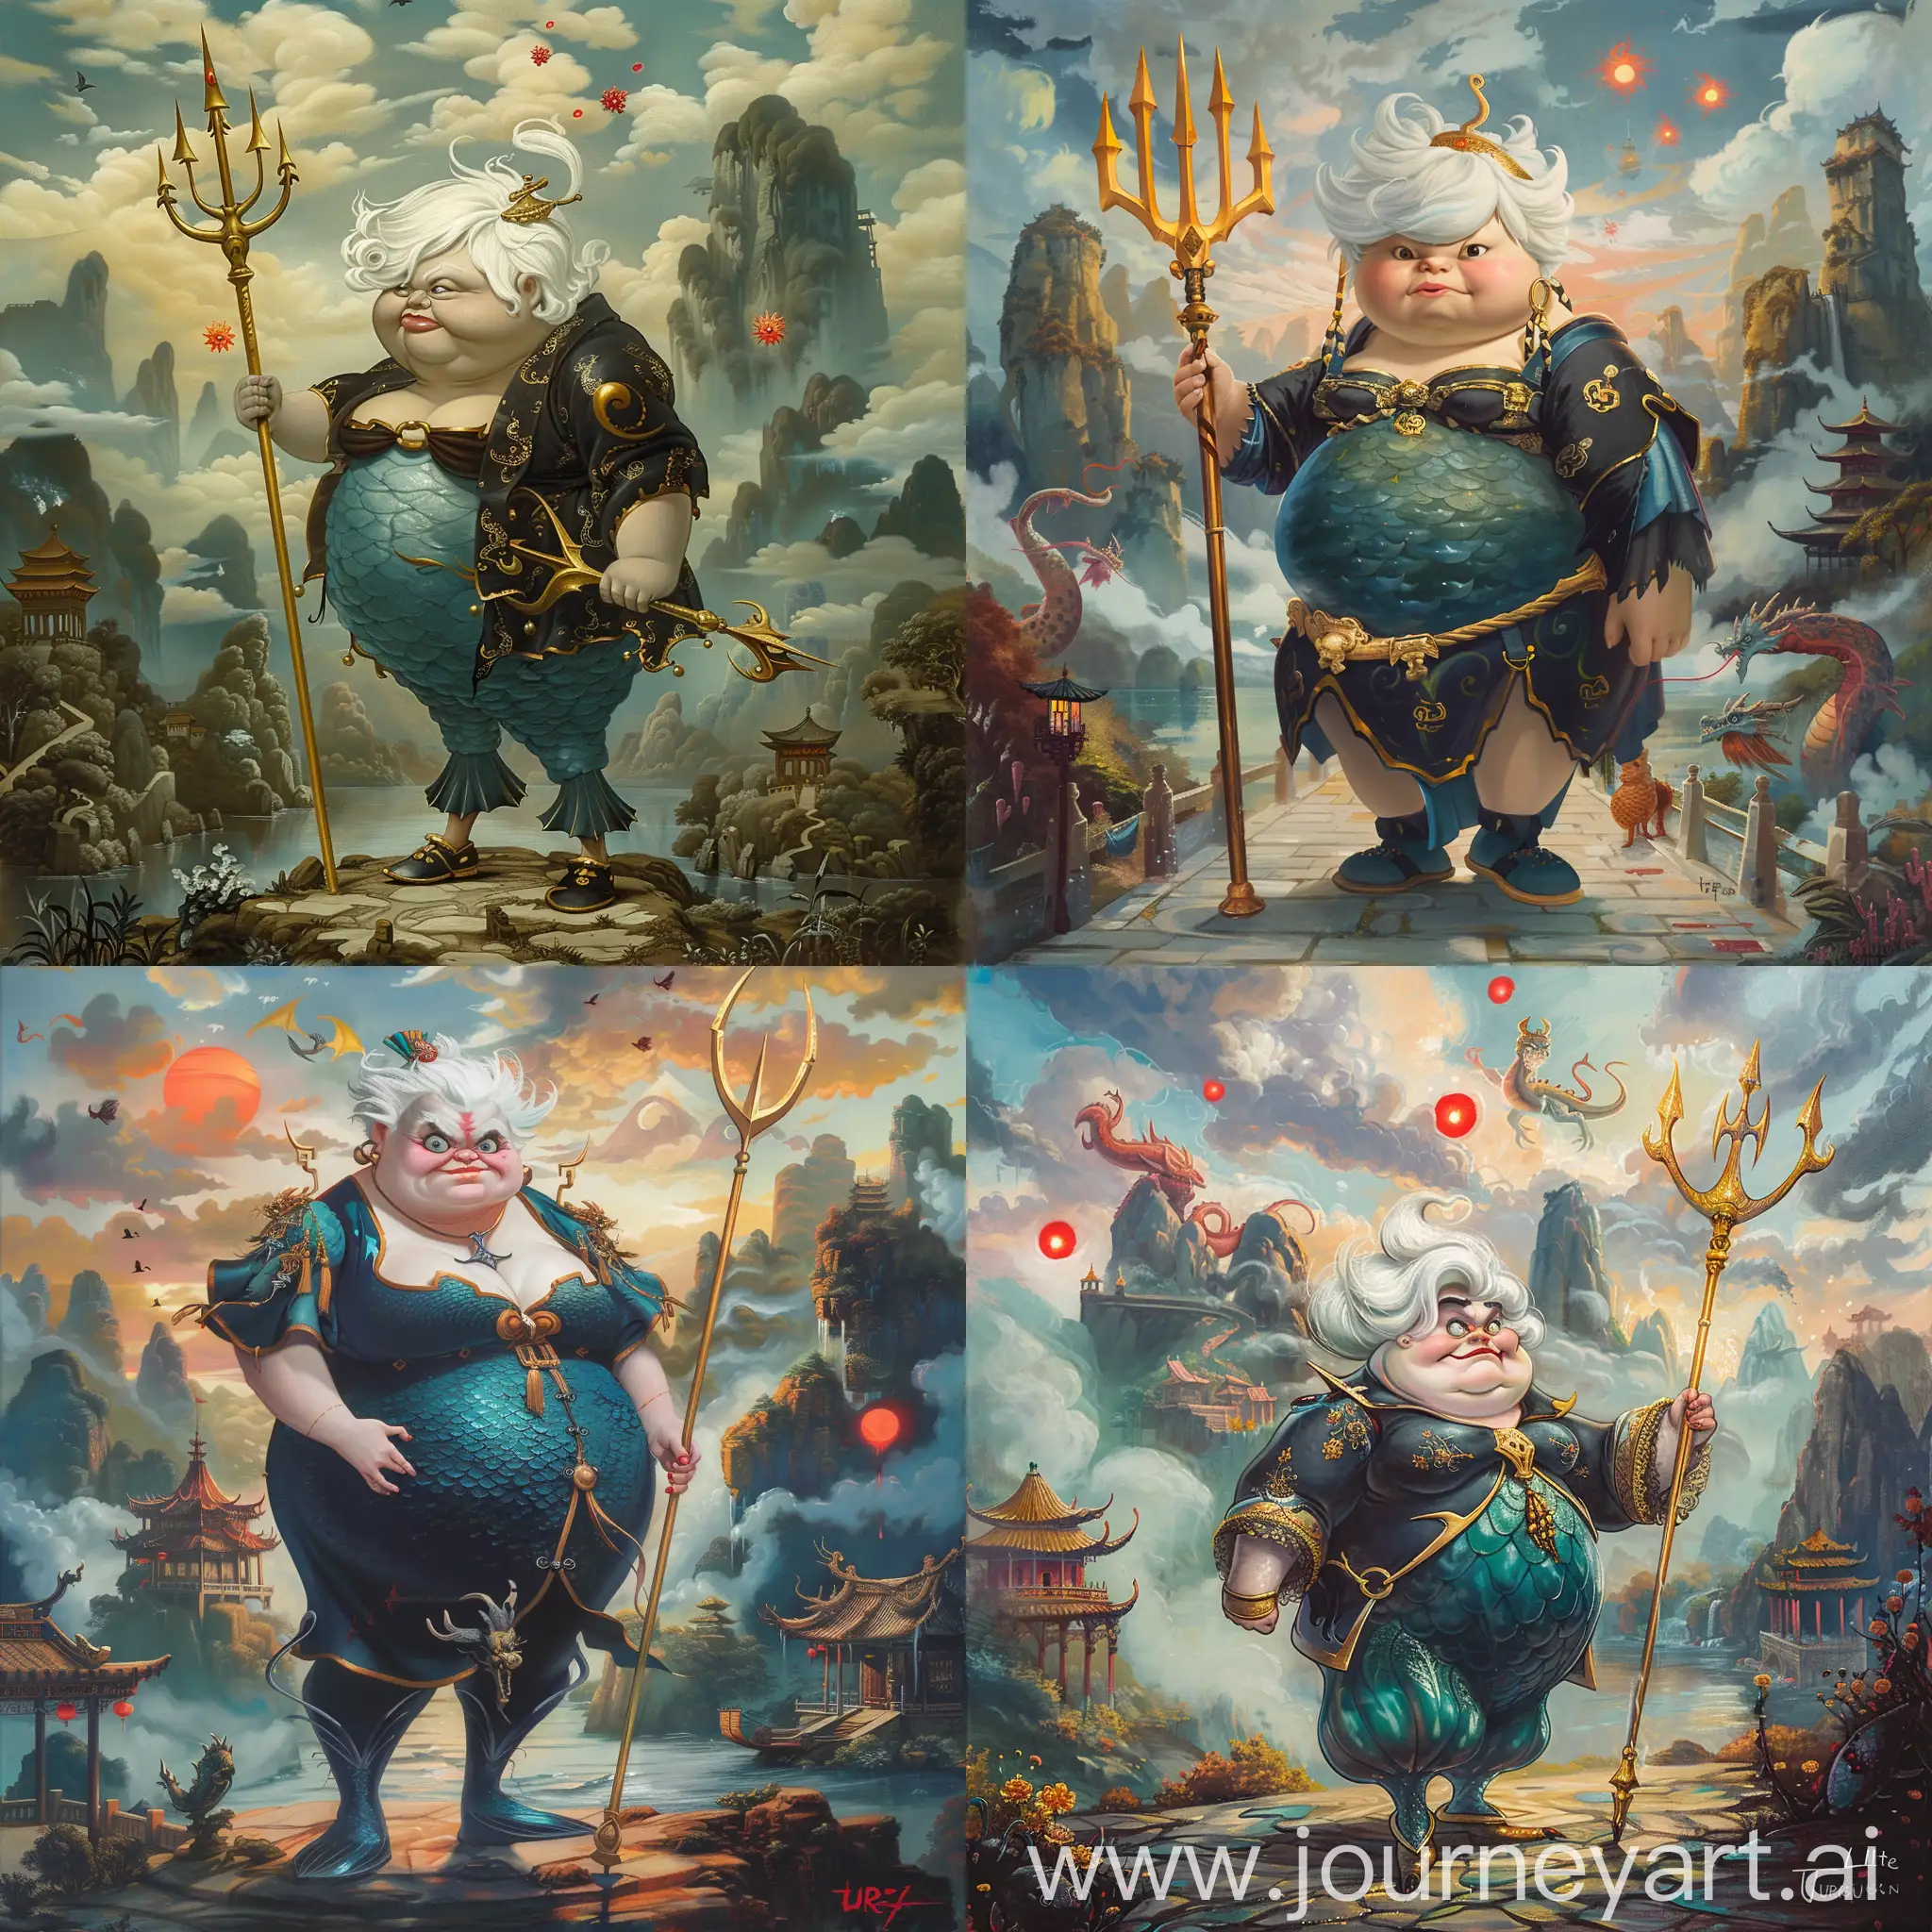 Ursula-the-Chubby-Disney-Villain-Wielding-a-Golden-Trident-in-Chinese-Medieval-Attire-amidst-Mystical-Guilin-Mountains